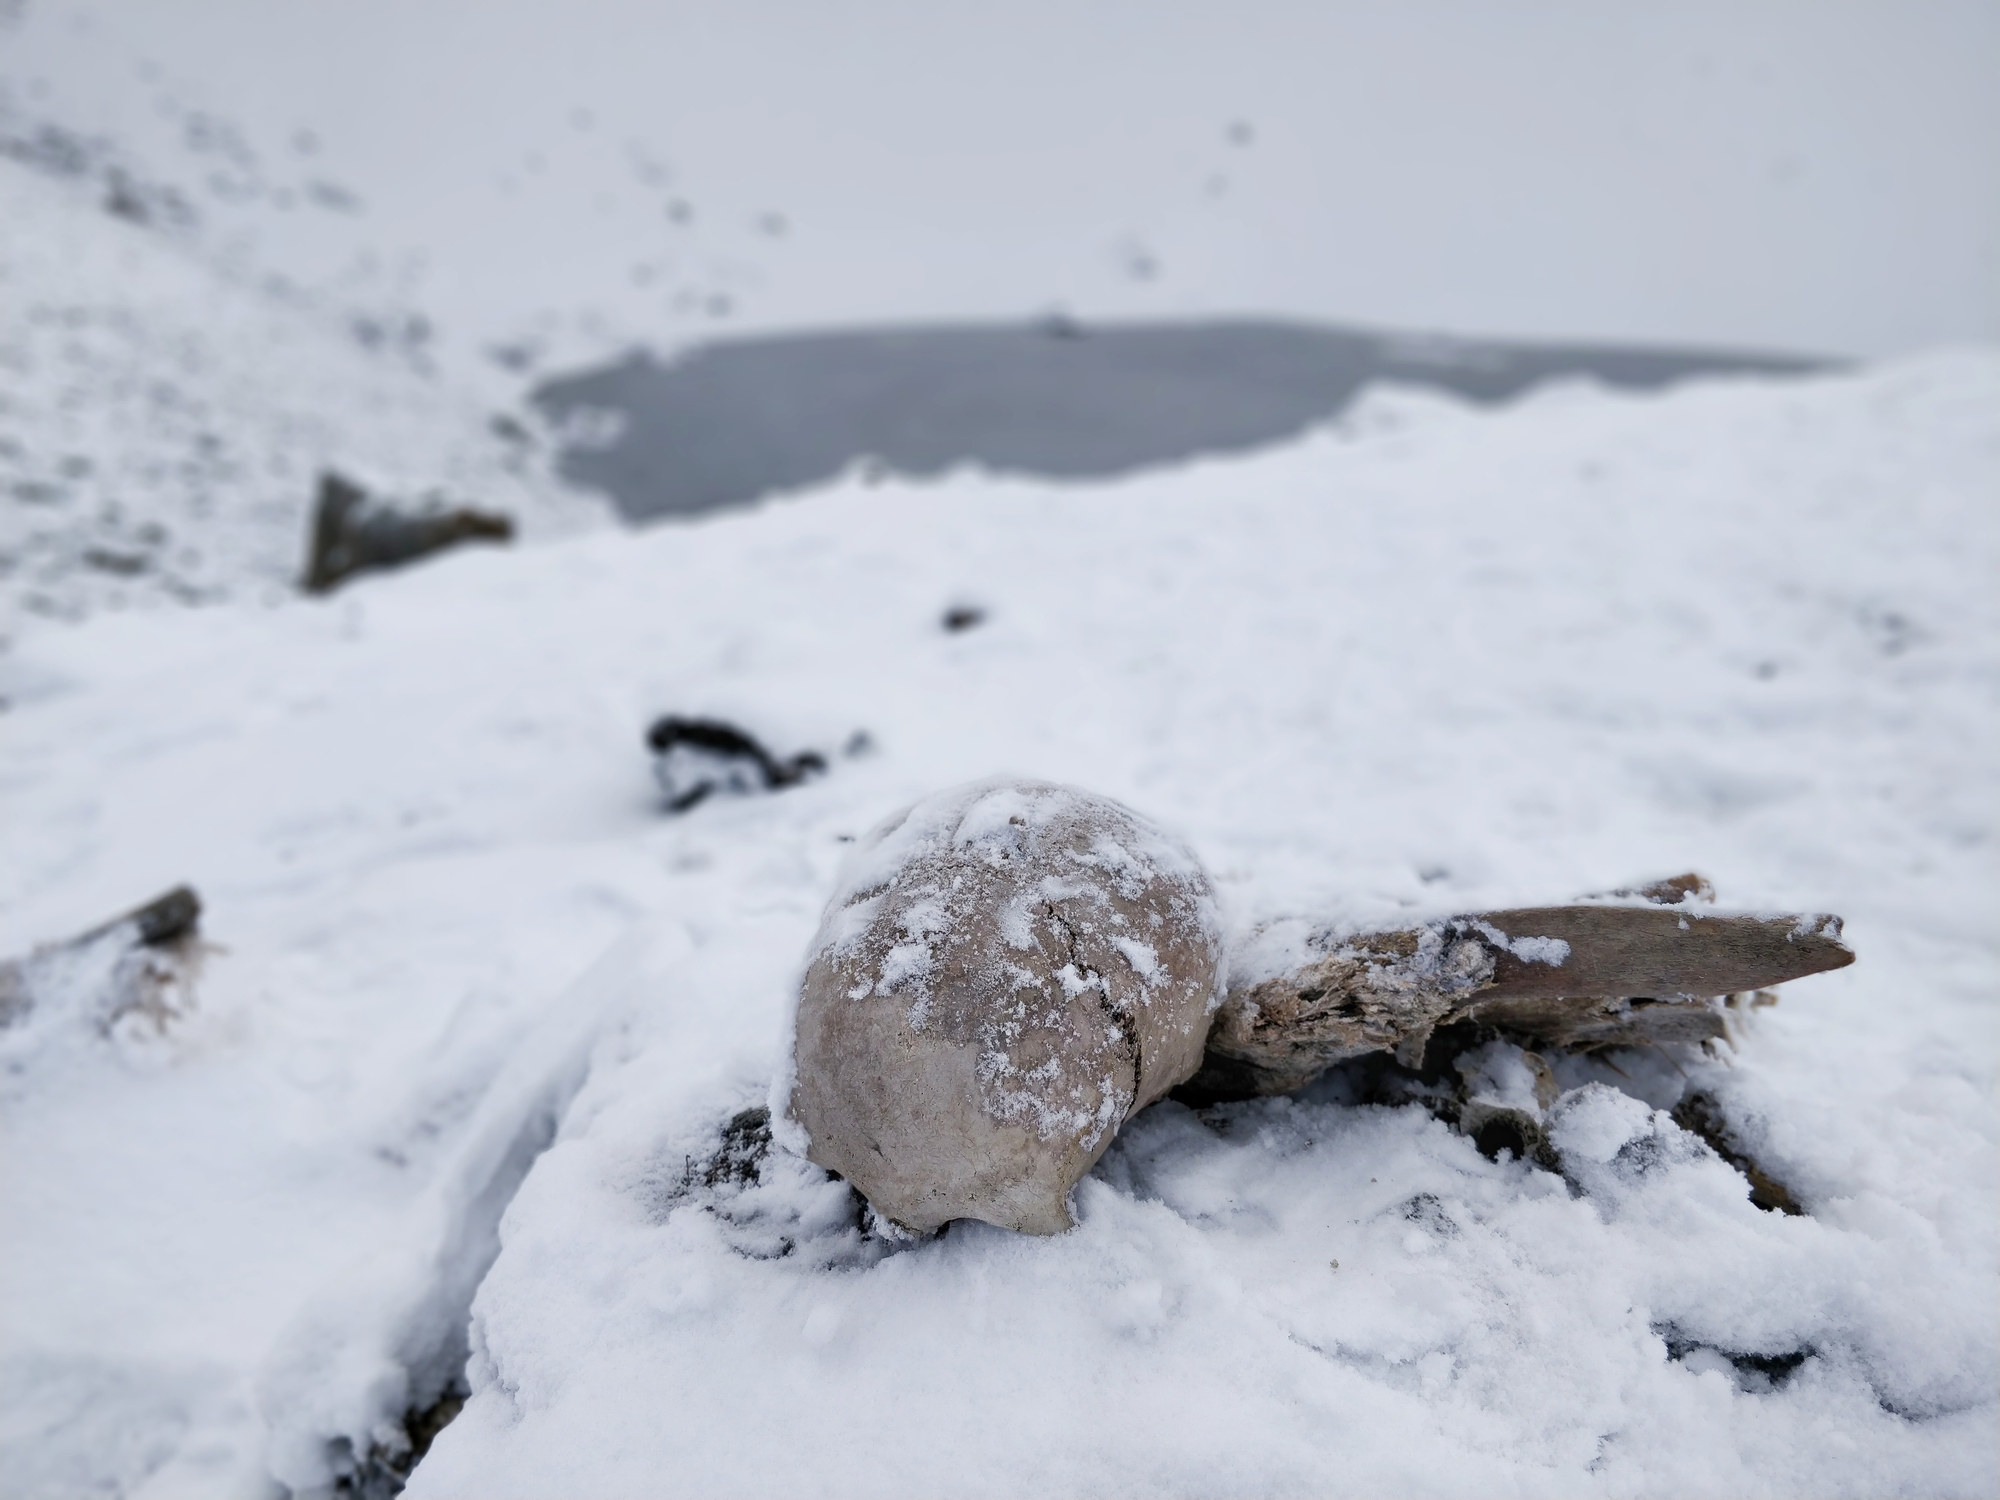 Naturally preserved ancient human skeletons under snow found beside high altitude alpine Roopkund lake in Indian Himalayas